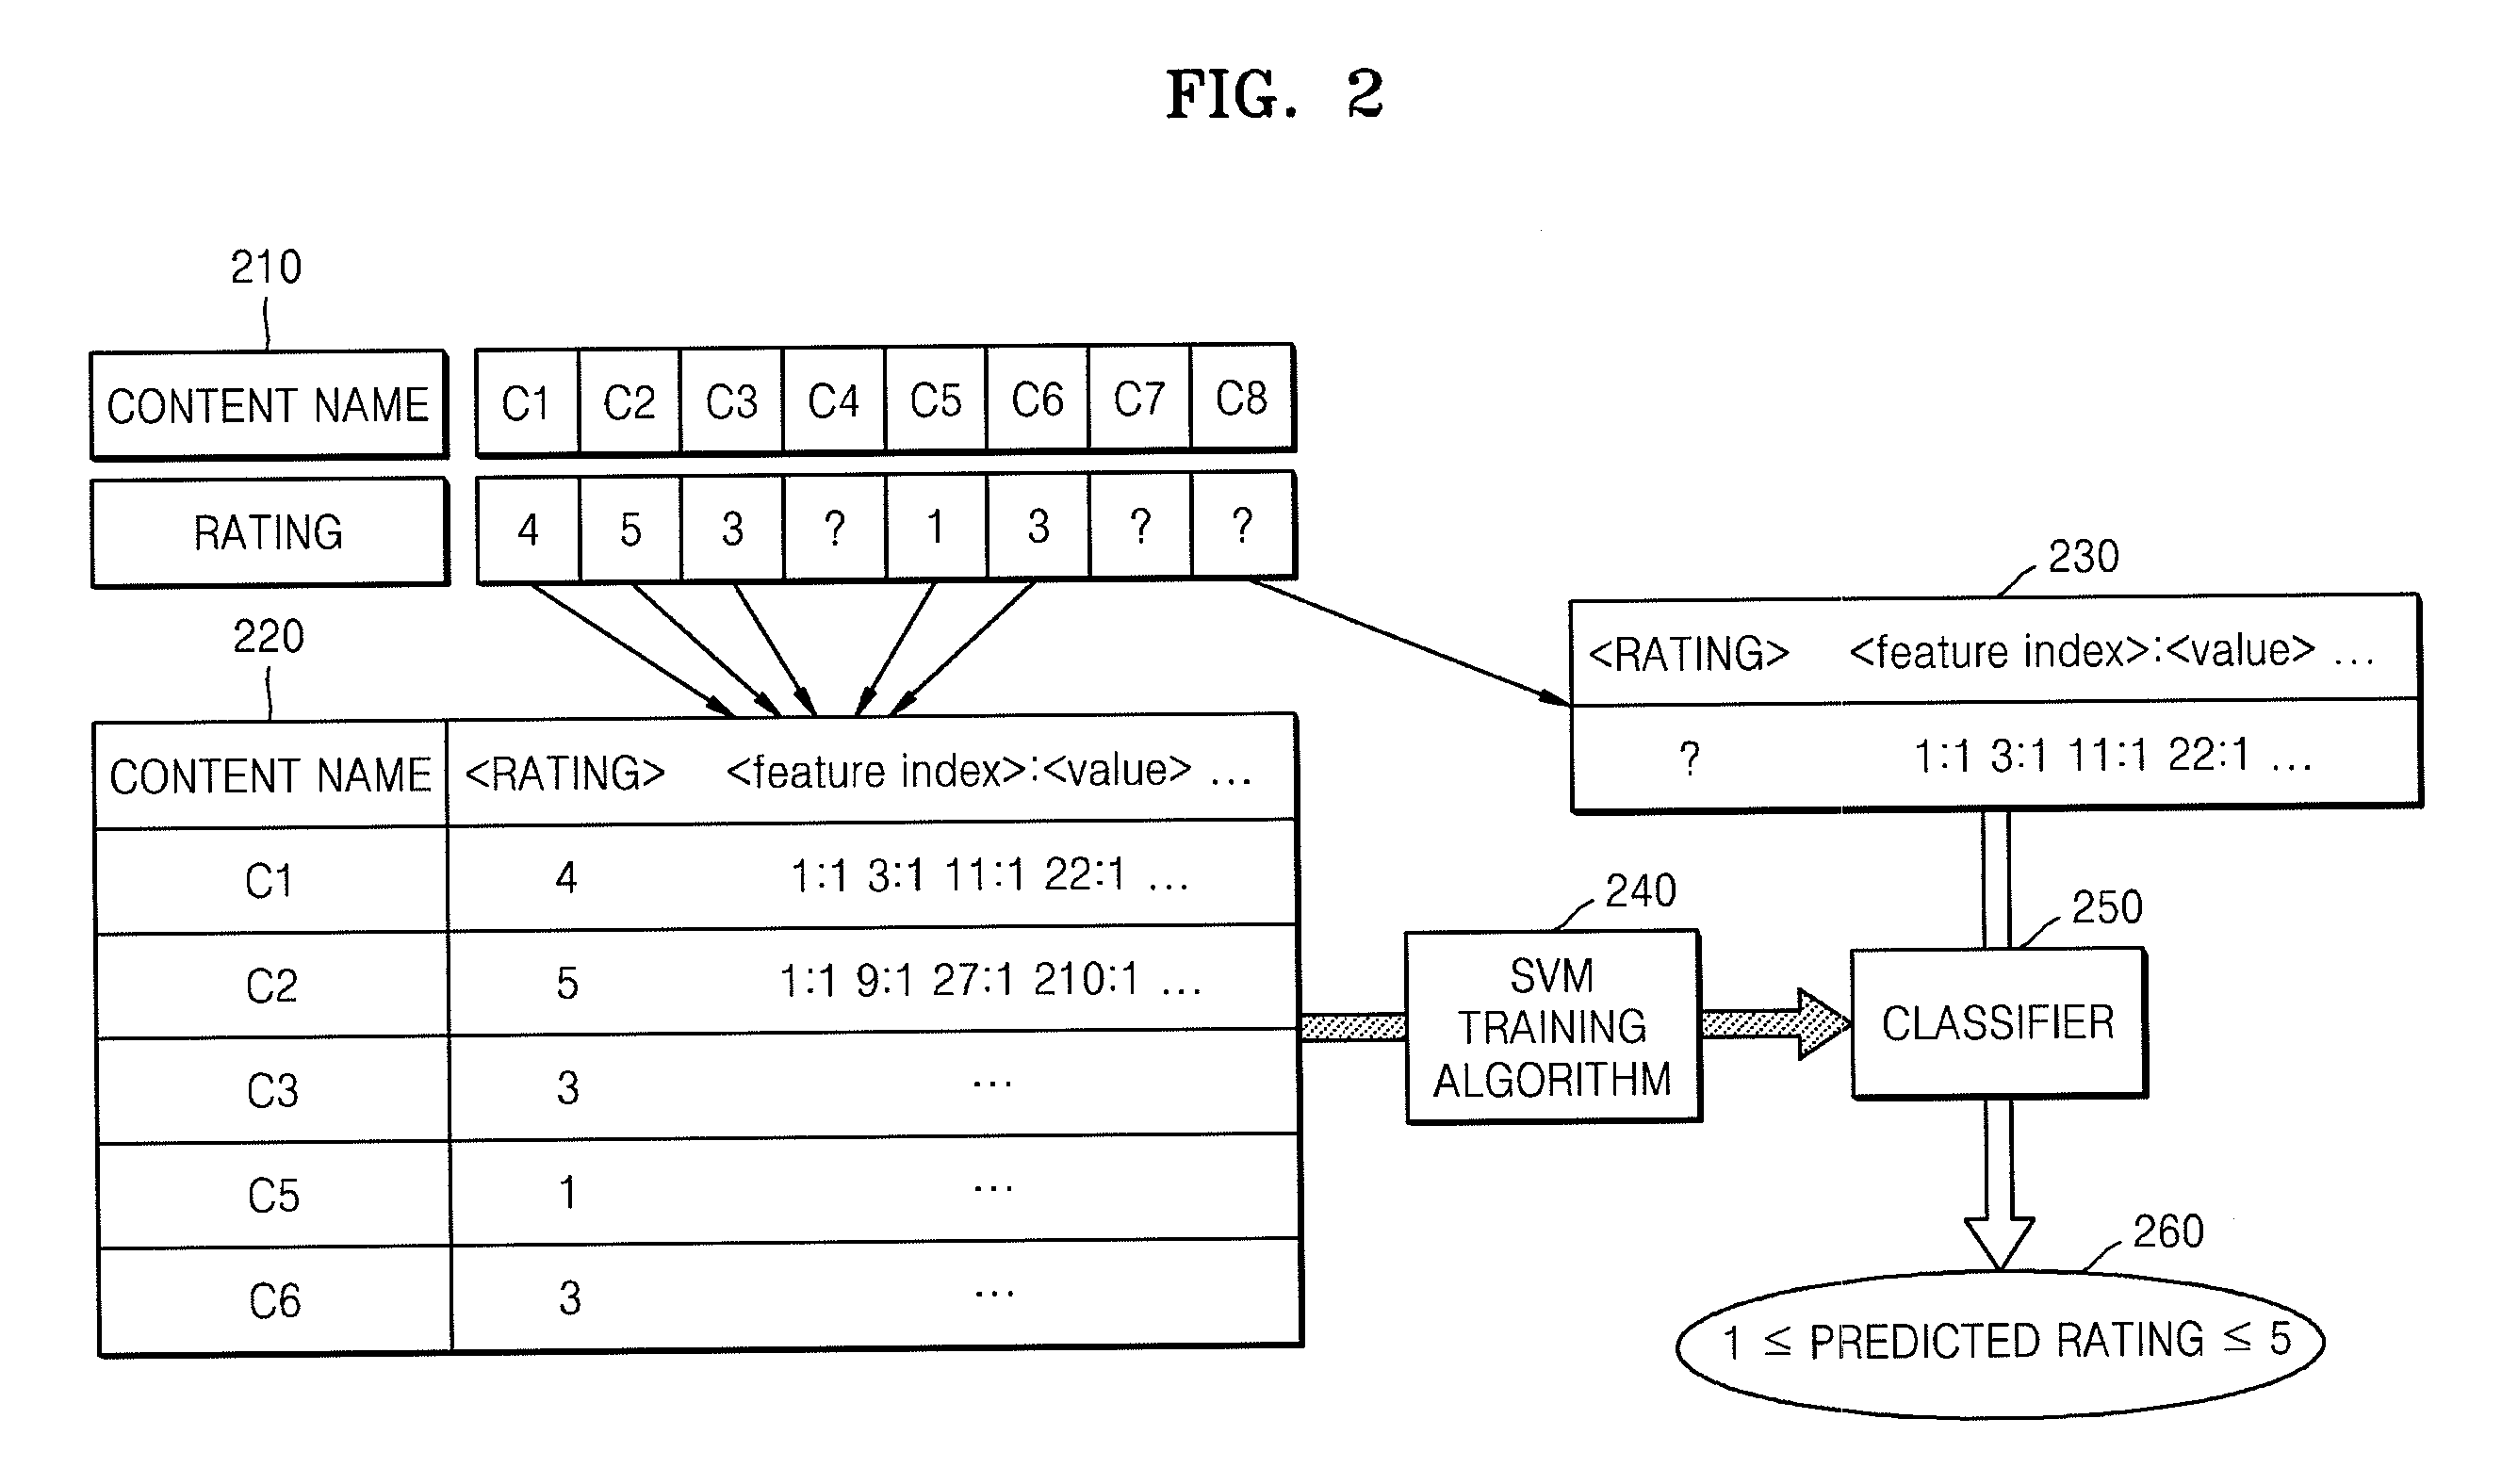 Method and apparatus for predicting preference rating for content, and method and apparatus for selecting sample content